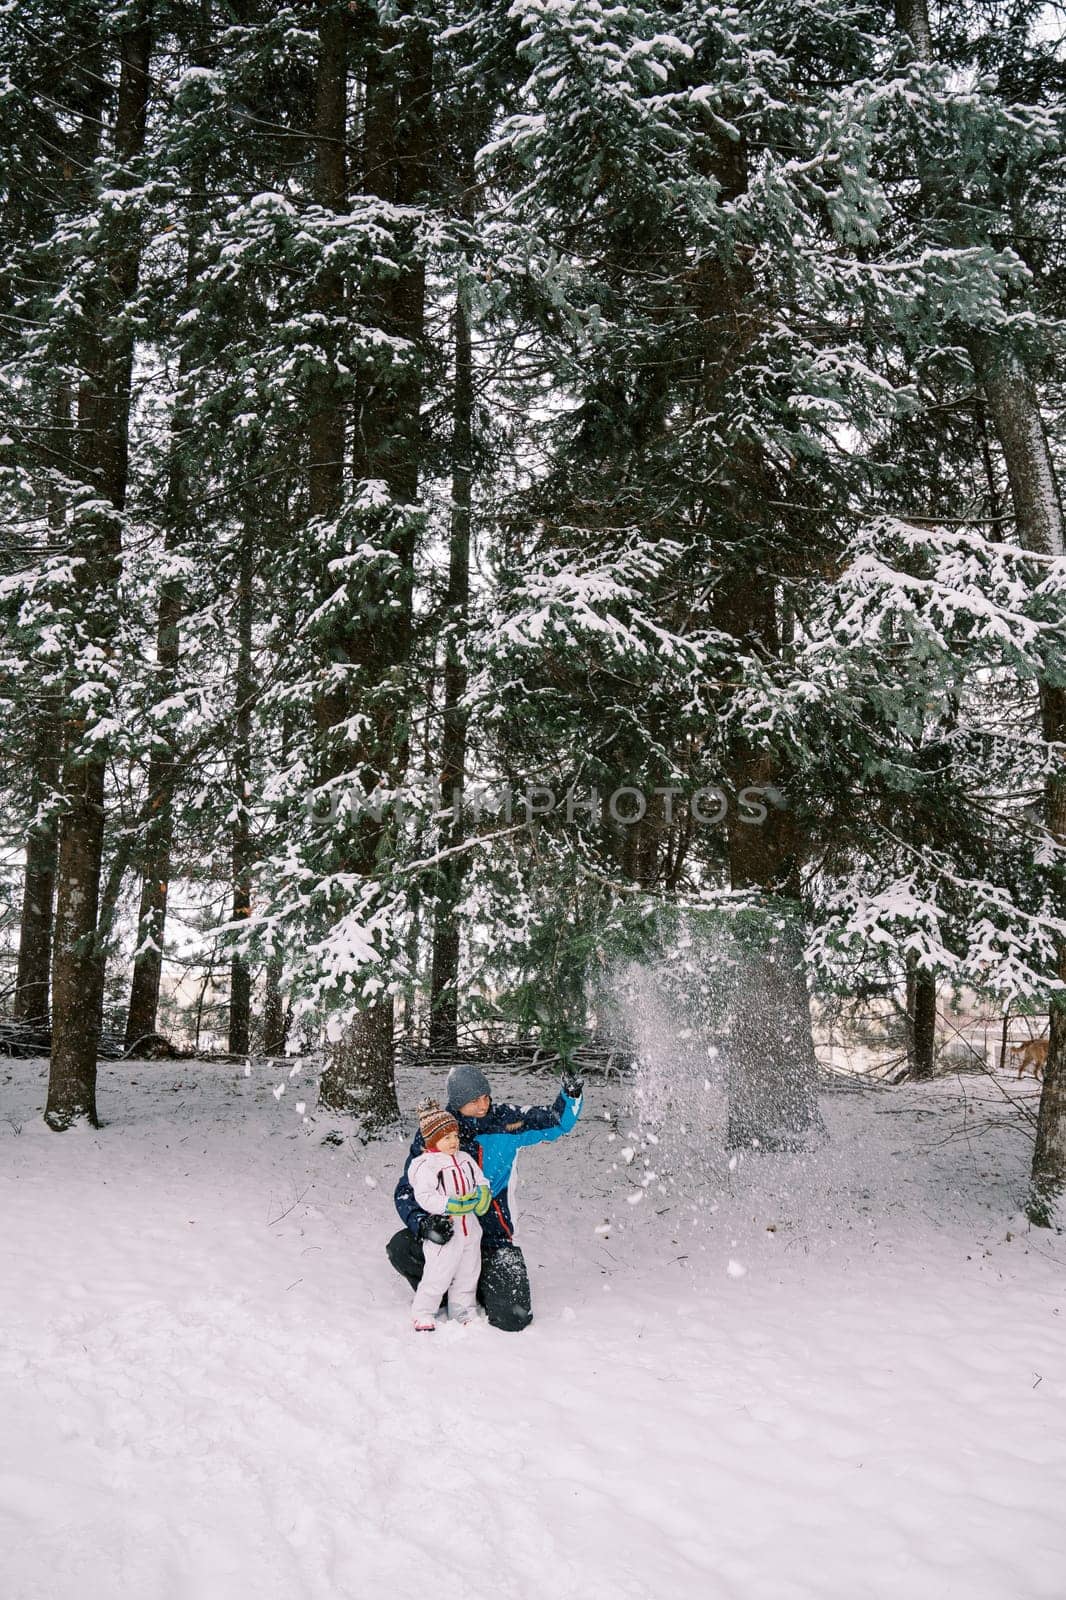 Dad squatted hugging a small child under snowfall in a snowy forest. High quality photo